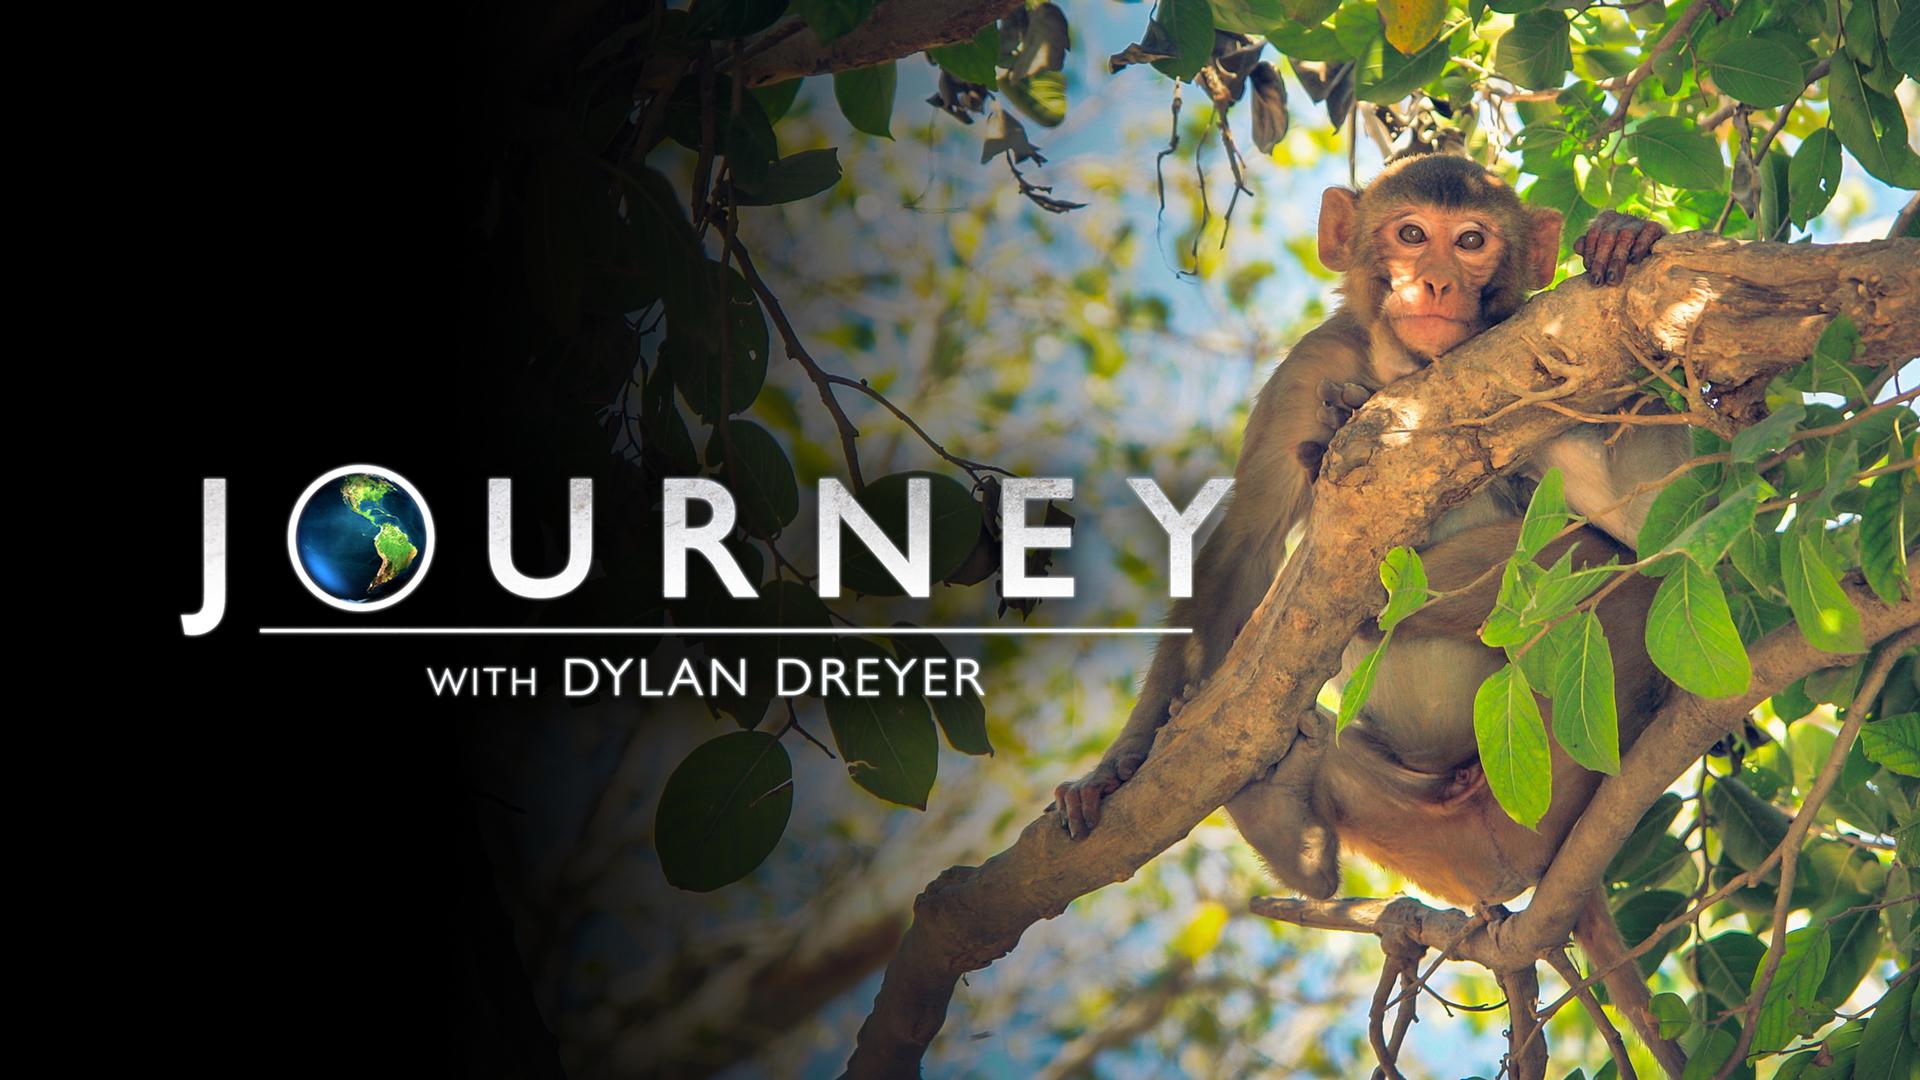 Journey With Dylan Dryer - Trailer